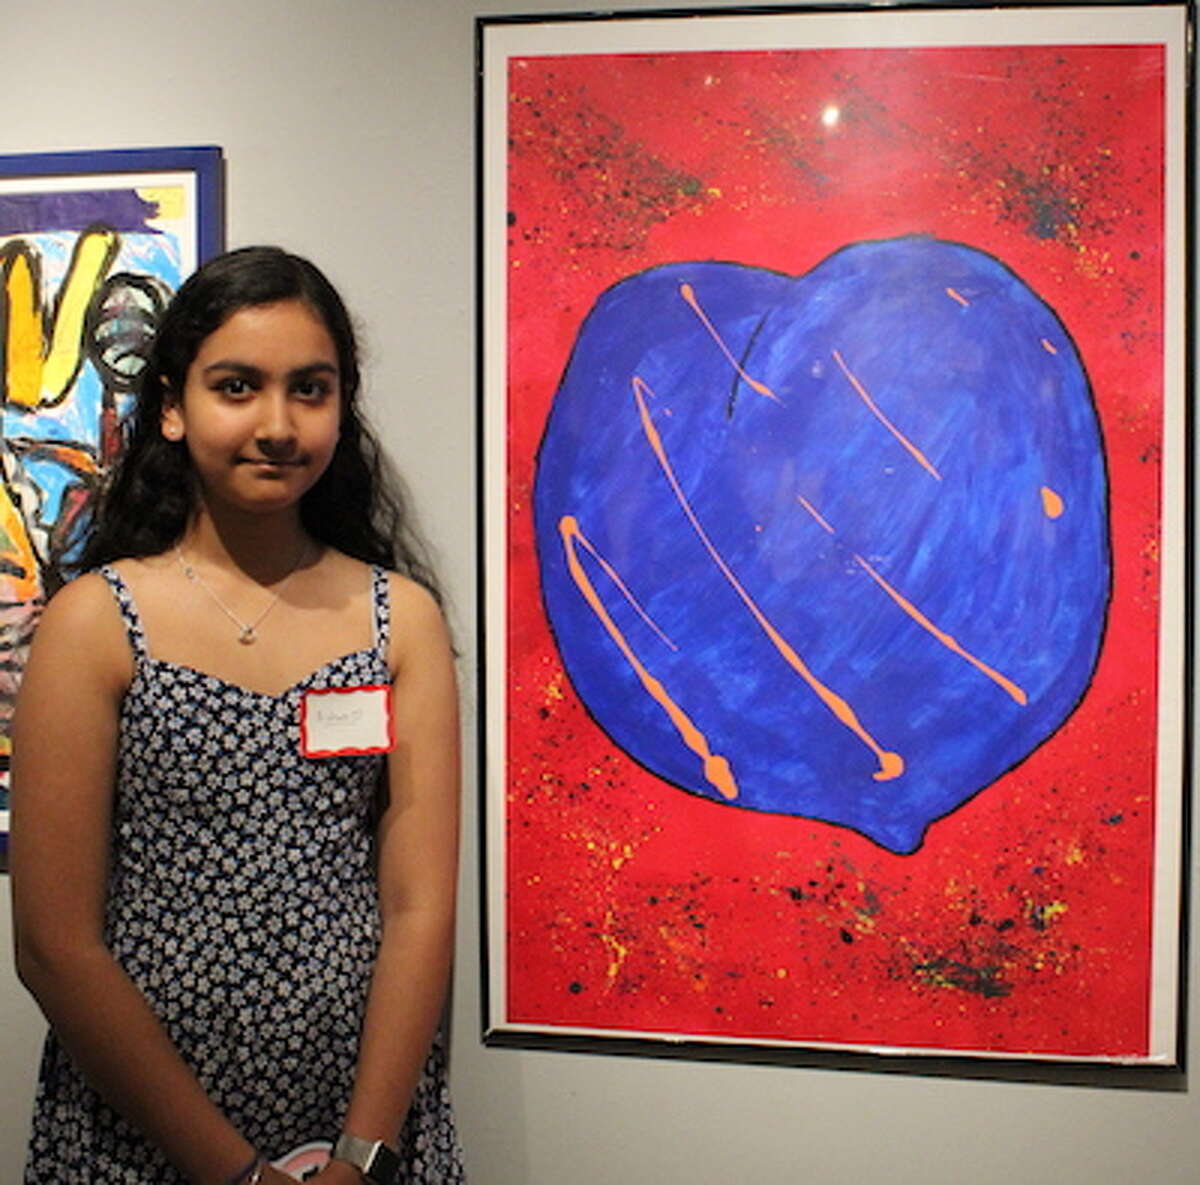 Aishani Walia won 1st Prize in Painting at the 29th annual Silvermine School of Art Student Exhibition on June 2.